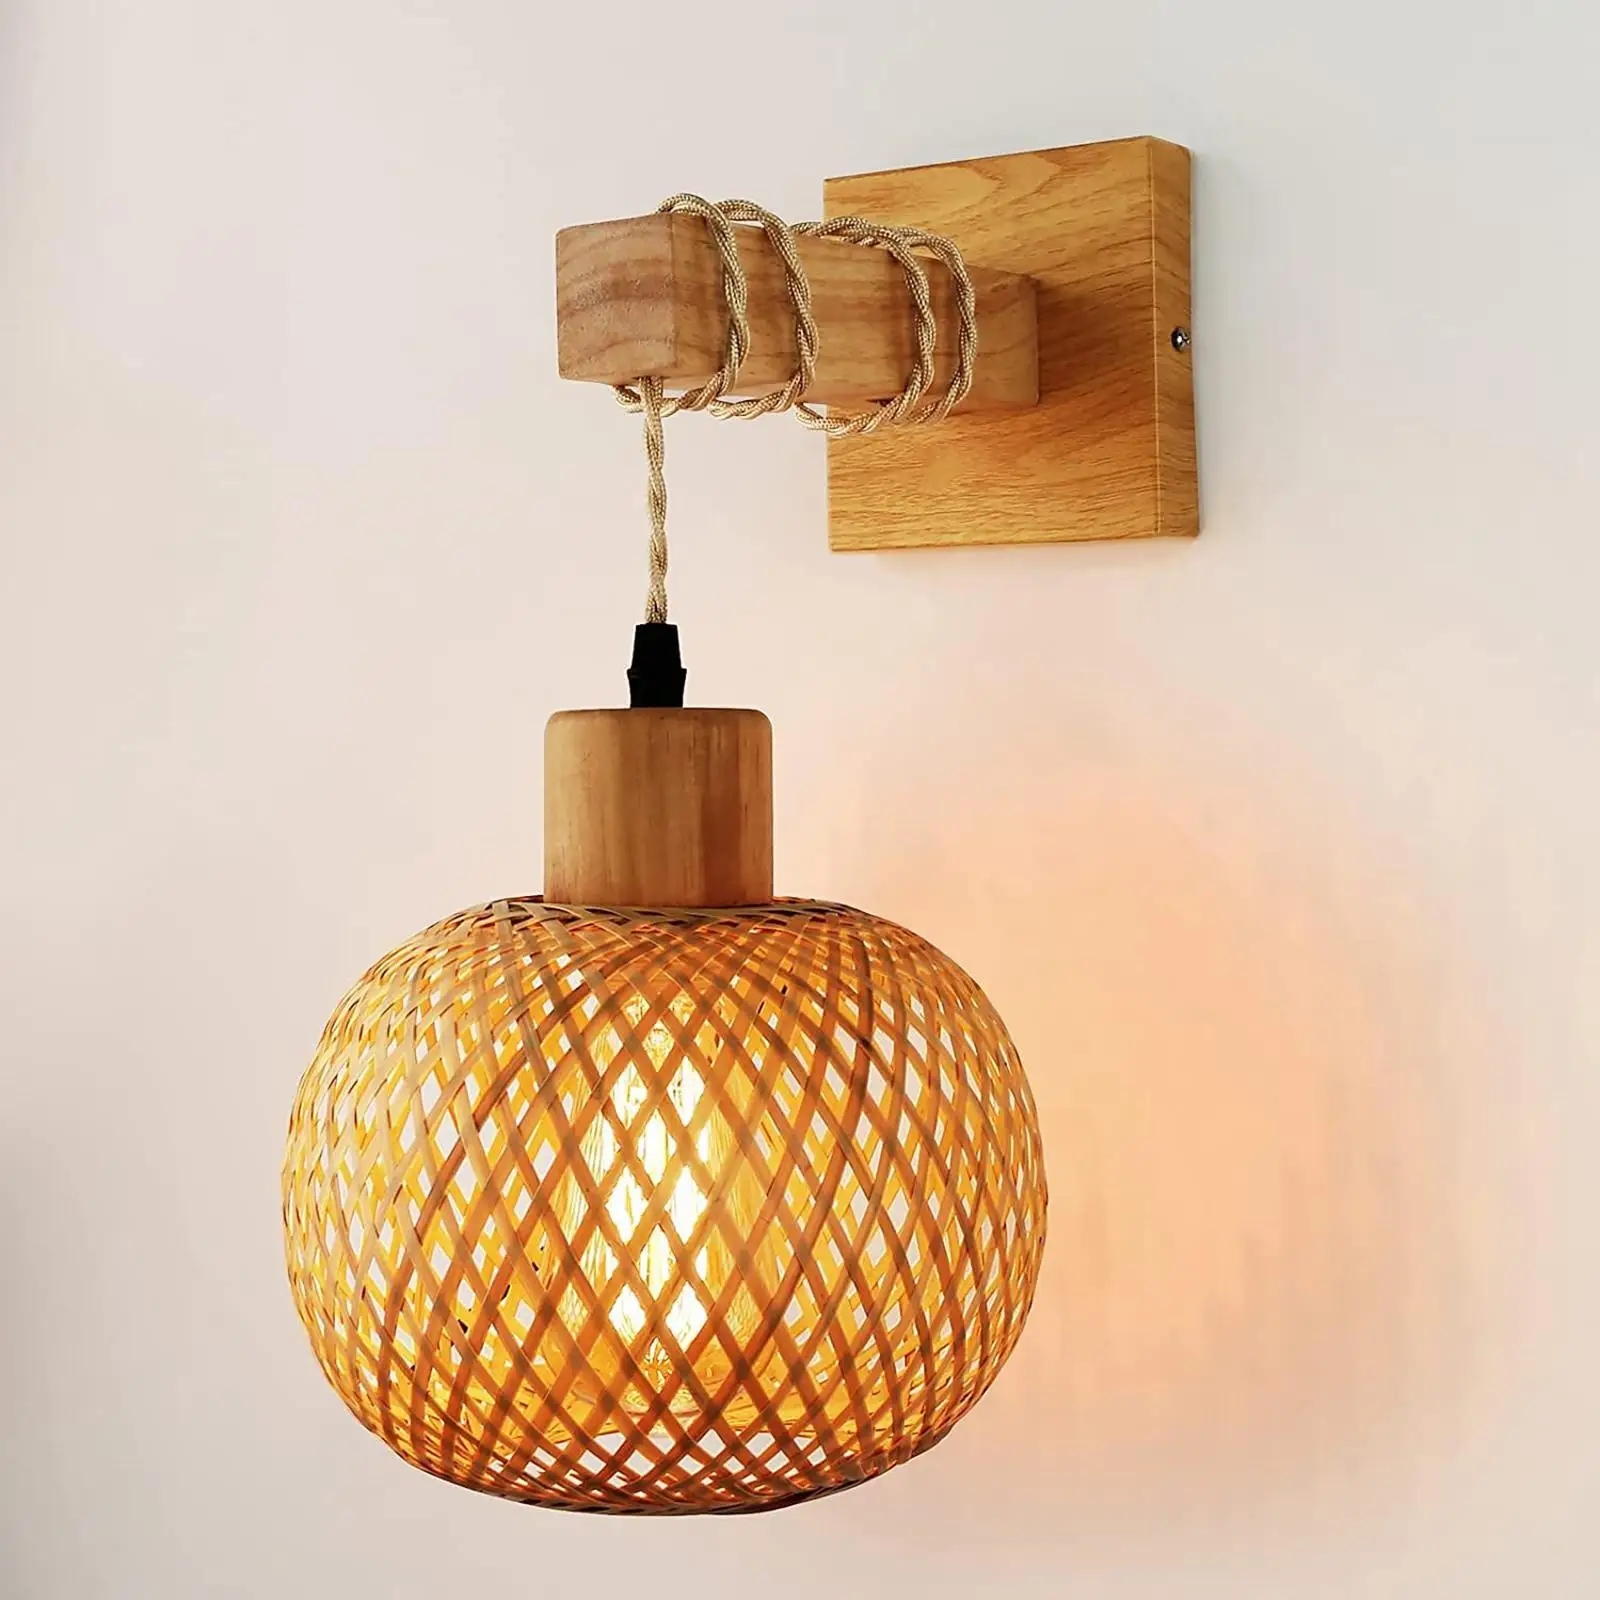 Retro Rattan Wall Sconce Light Fixture Rustic Bamboo Hand Woven for Bedroom